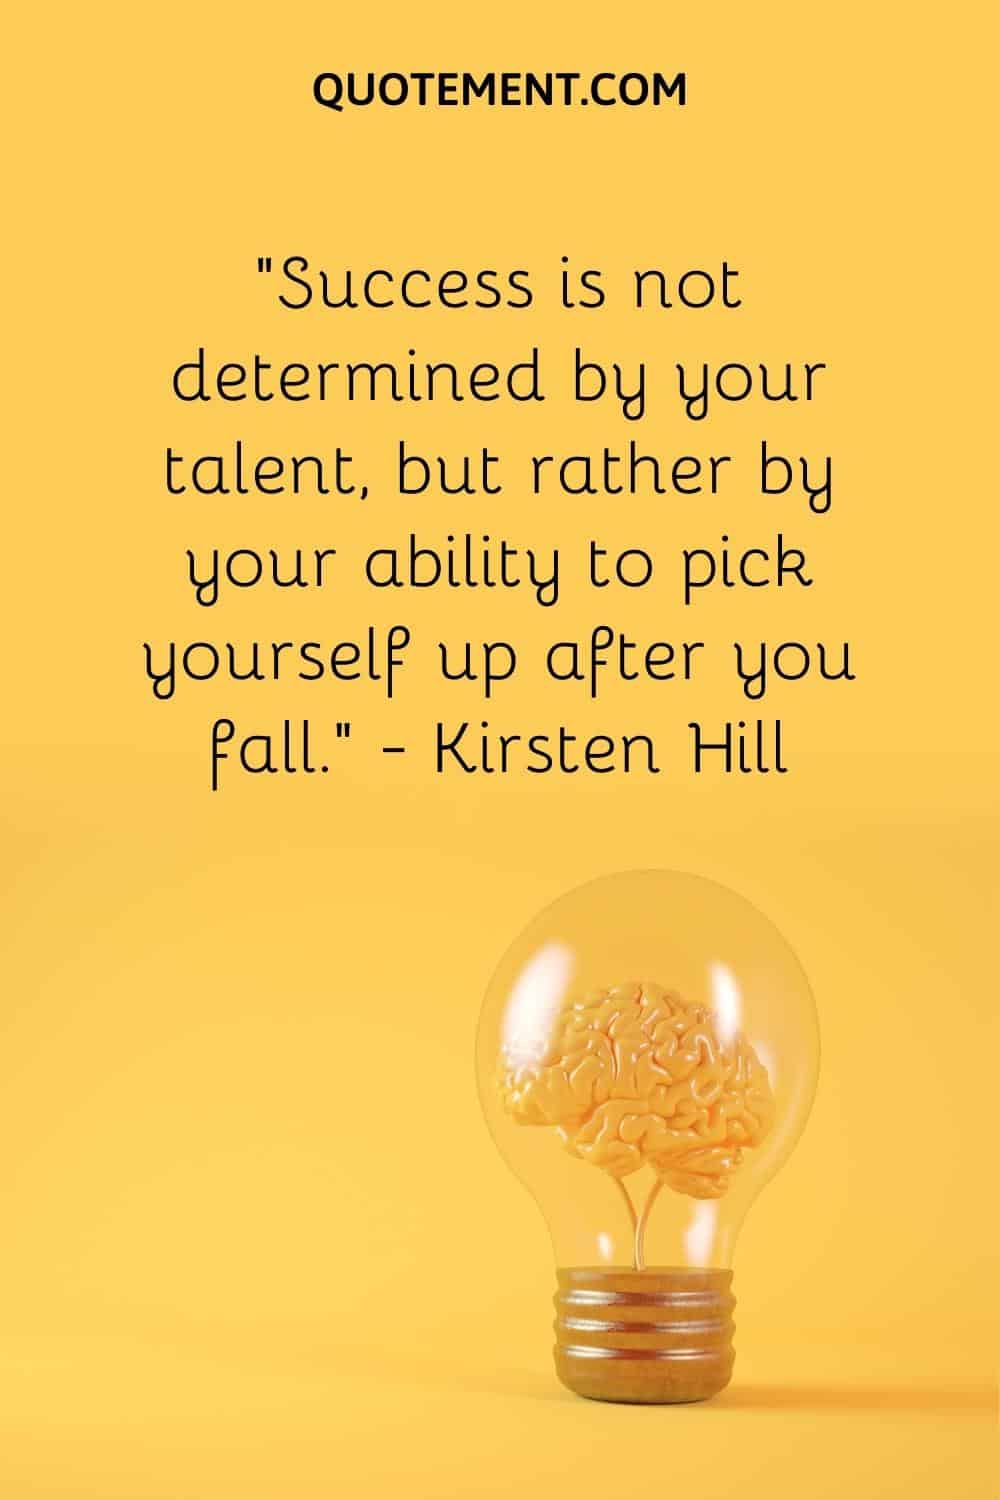 “Success is not determined by your talent, but rather by your ability to pick yourself up after you fall.” — Kirsten Hill